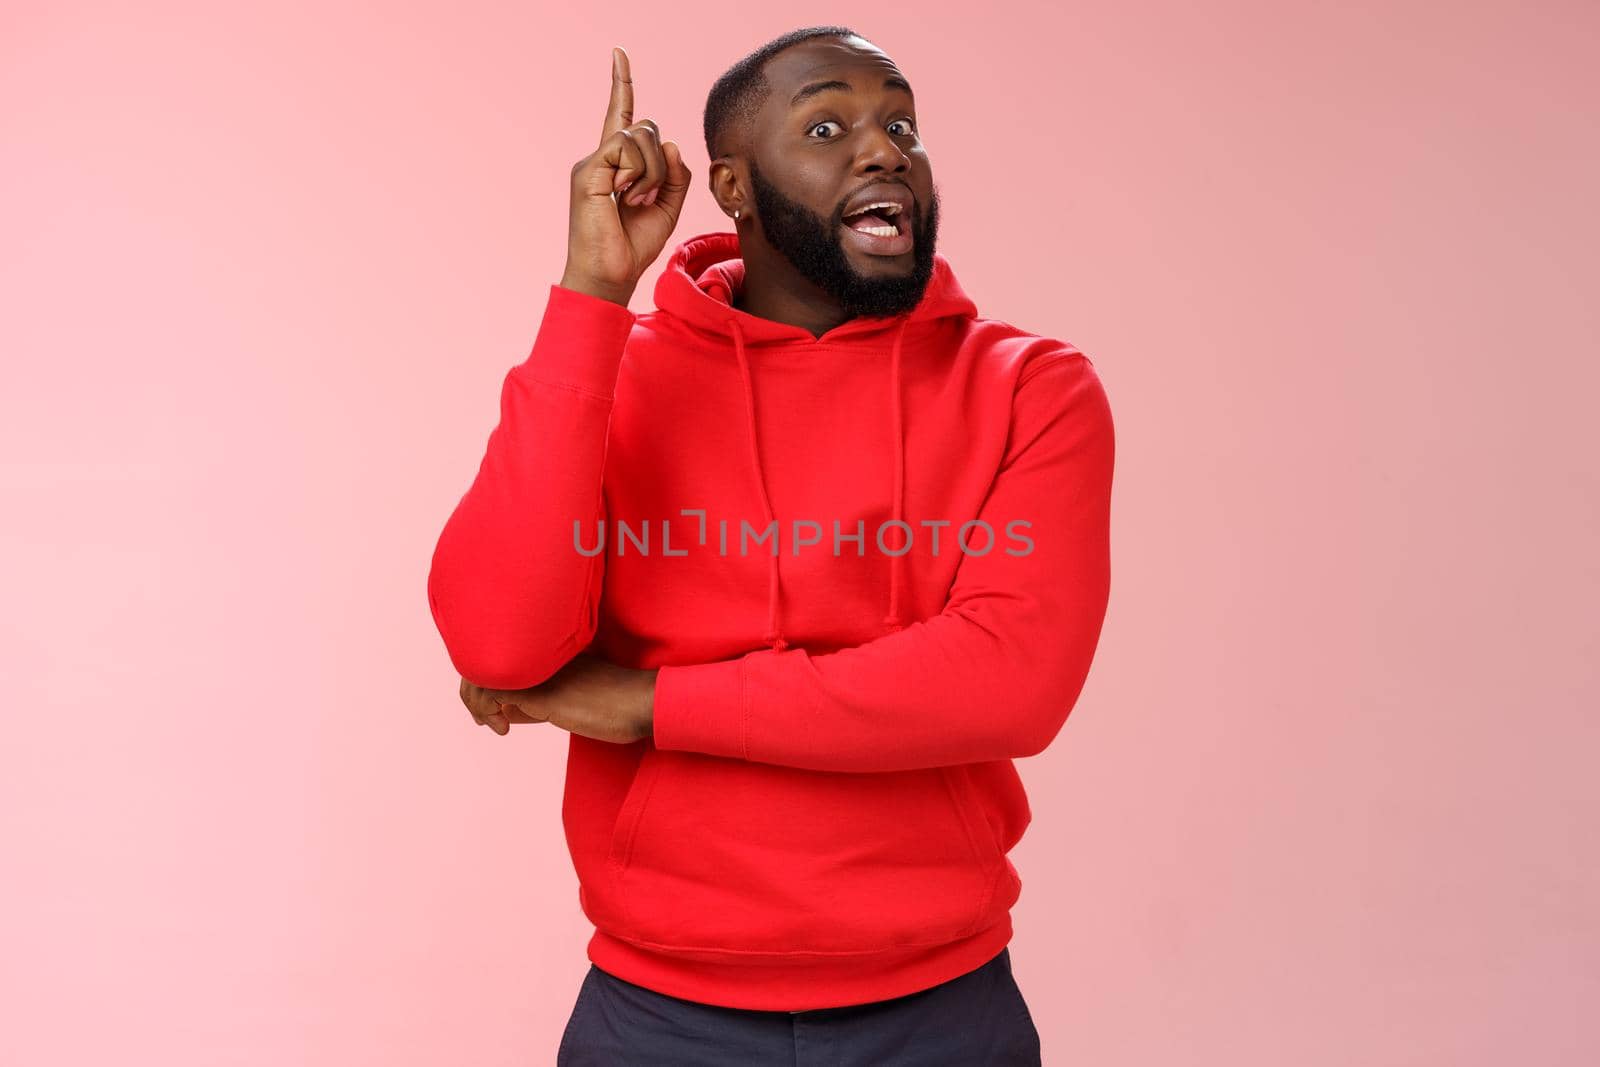 Got idea. Portrait excited african-american bearded guy inhale air have speech reise index finger eureka gesture wanna add word, have excellent plan sharing thoughts, standing pink background.